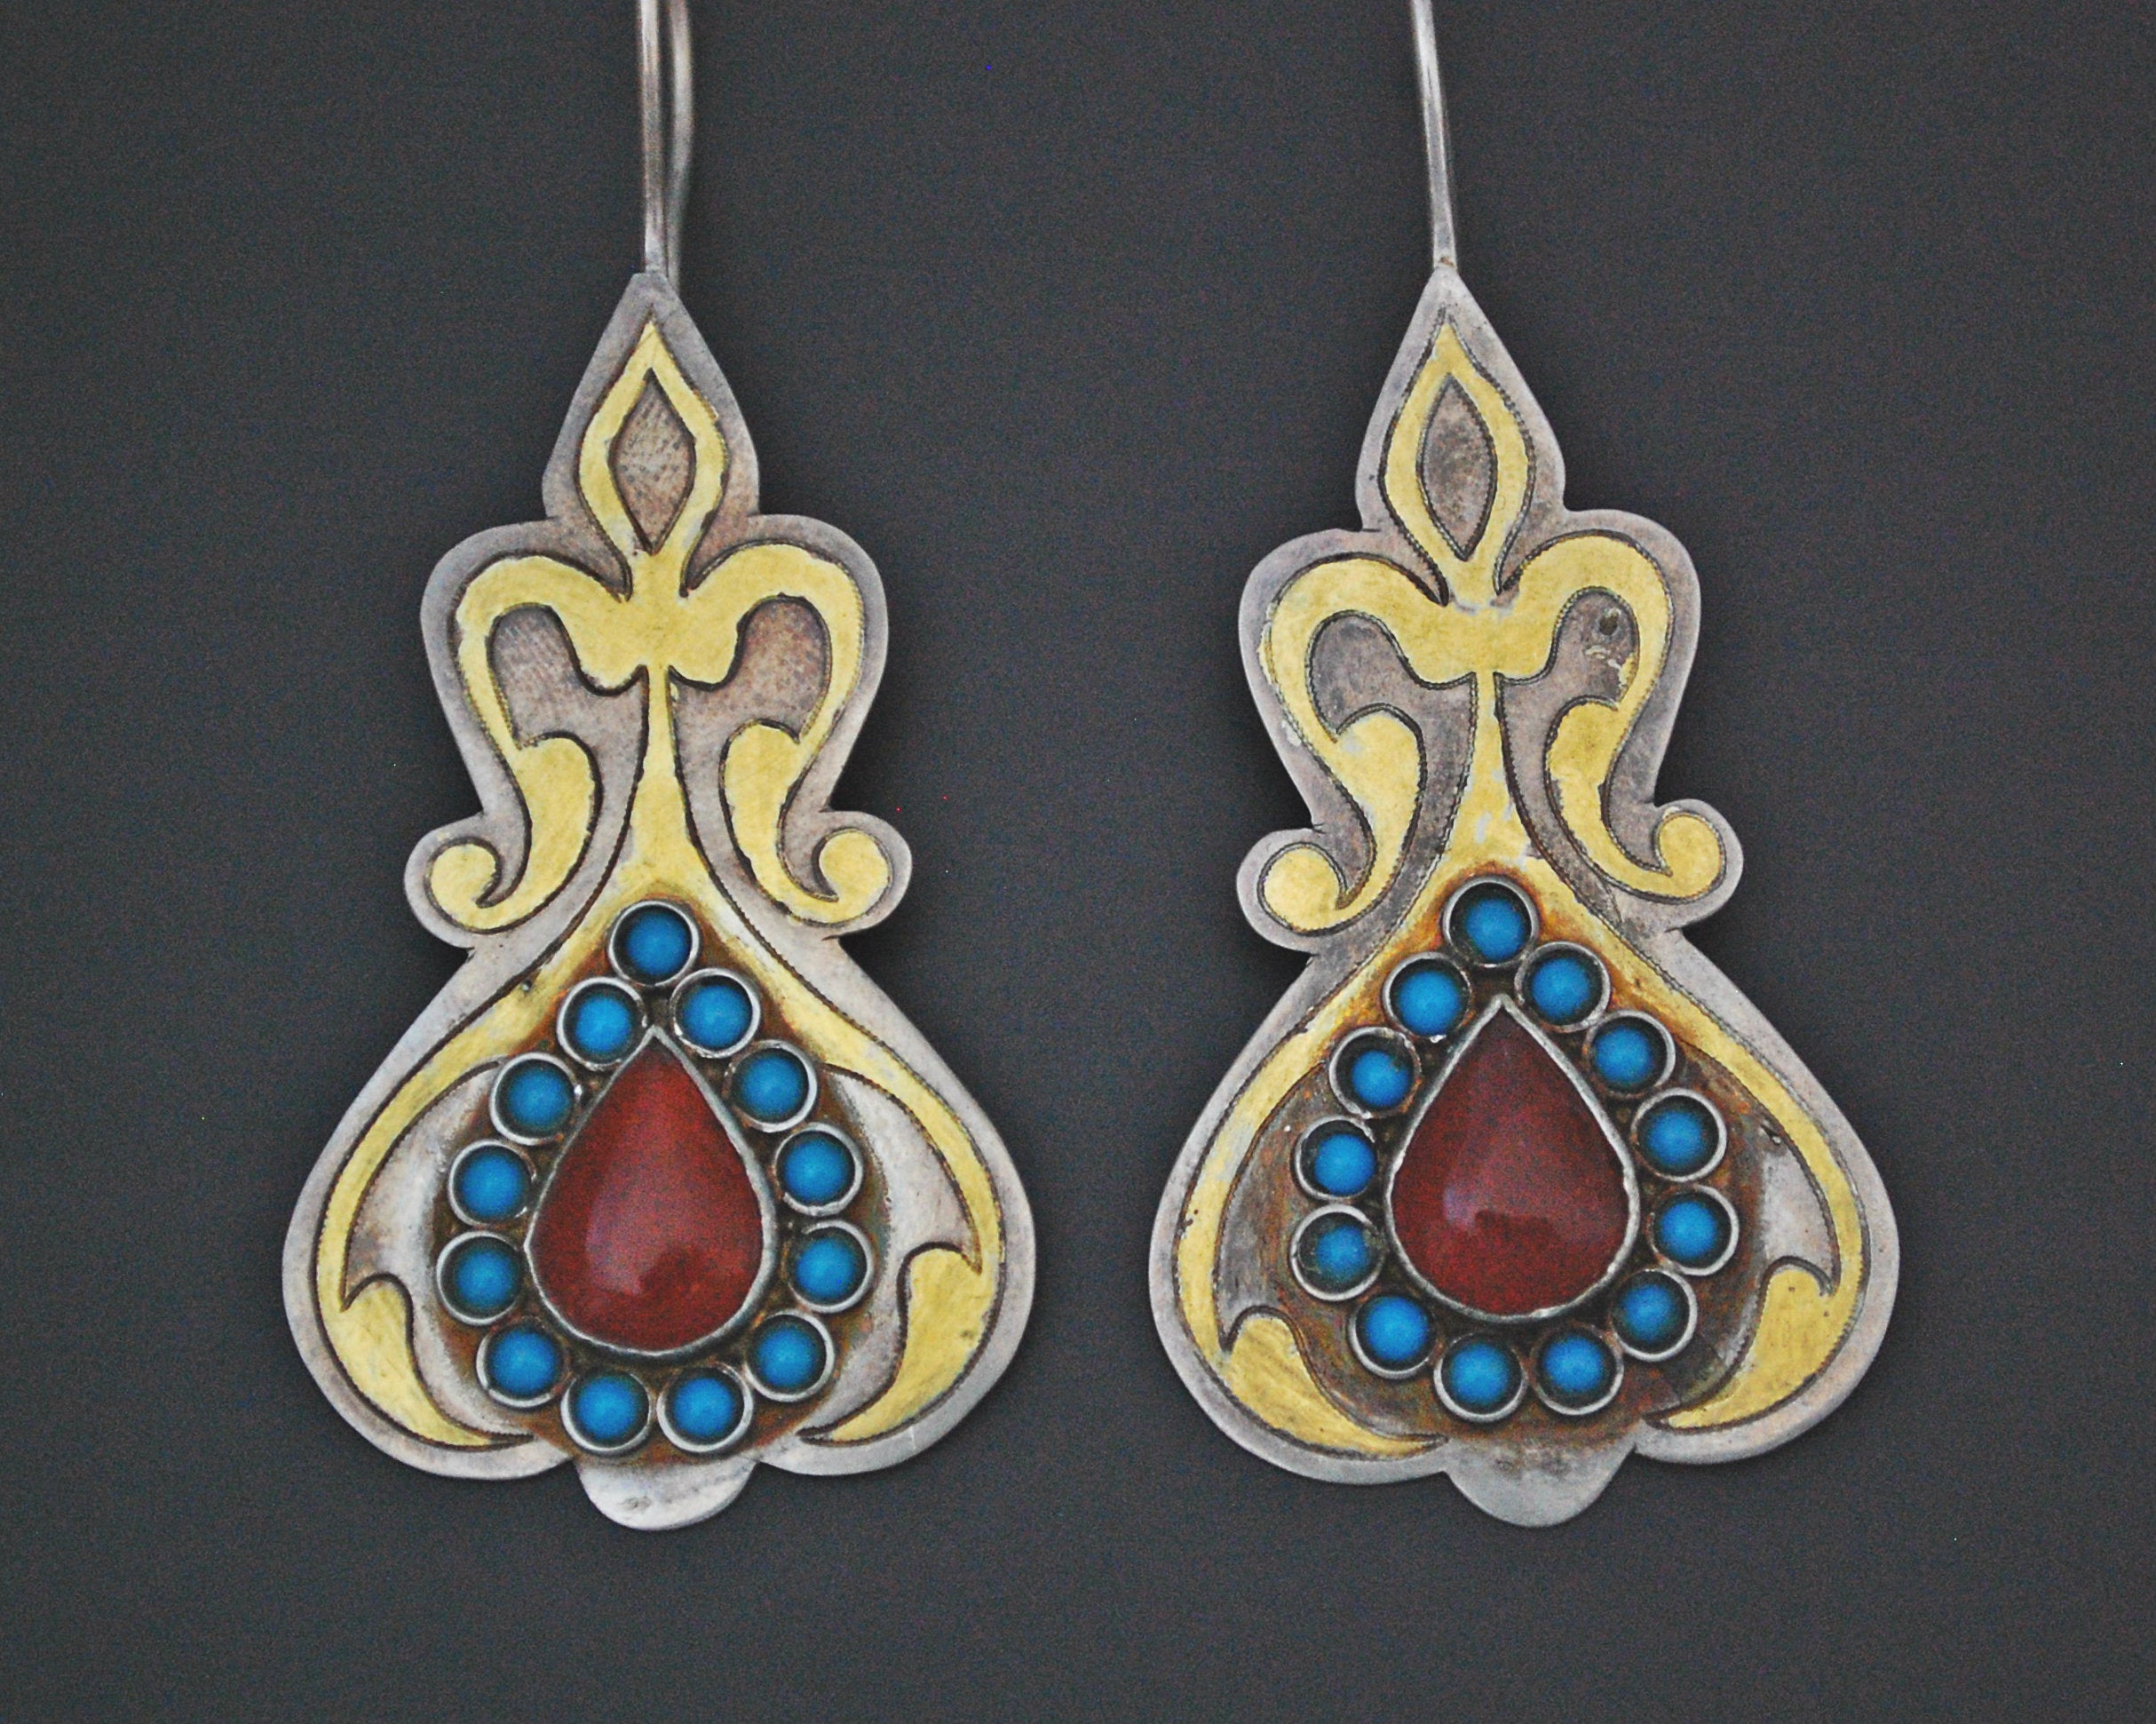 Vintage Turkmen Earrings with Carnelian and Turquoise